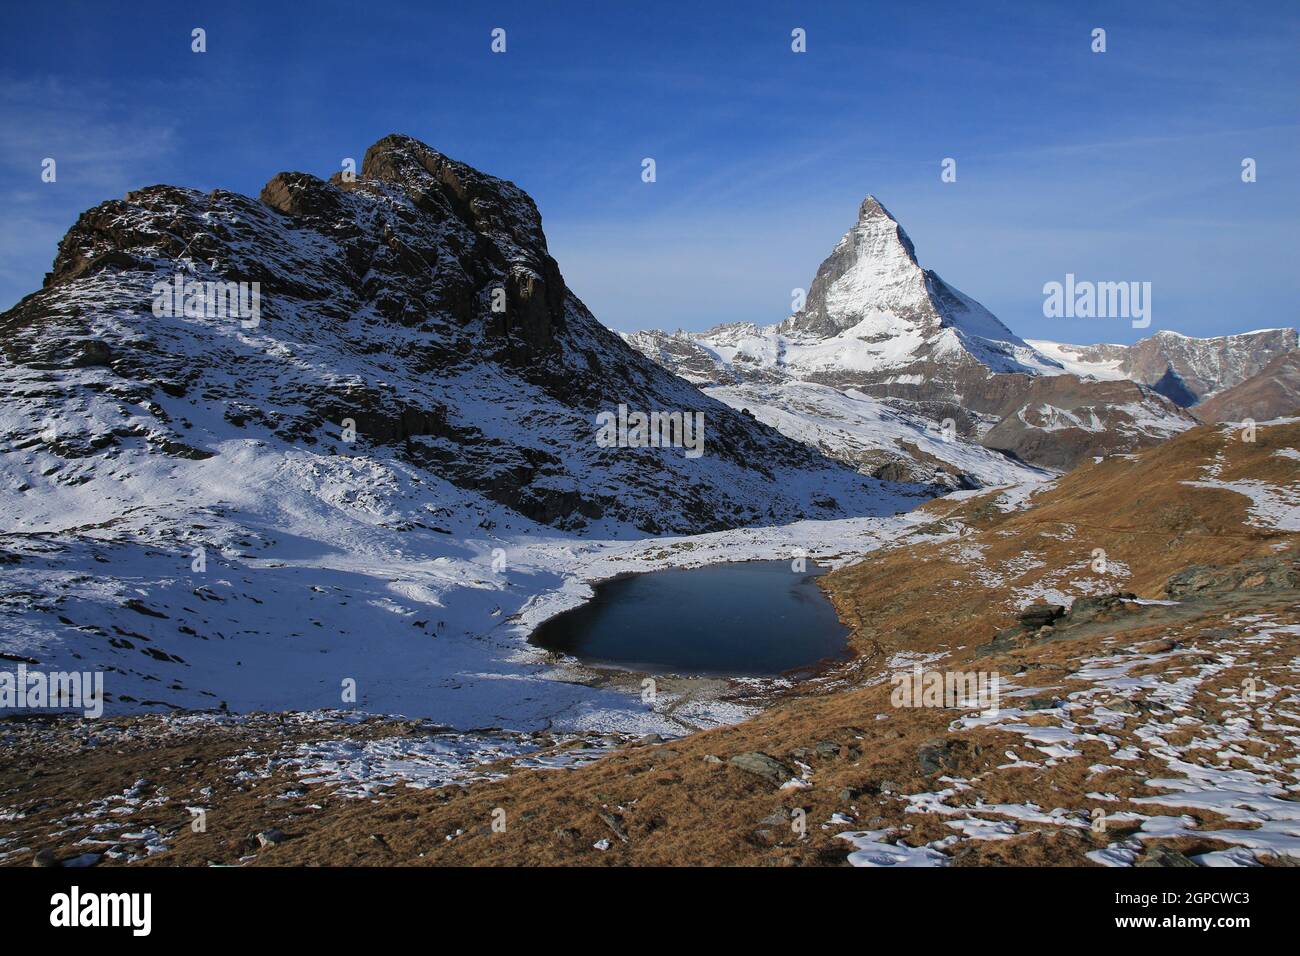 Morning scene on the Gornergrat, view of the Matterhorn and lake Riffelsee Stock Photo